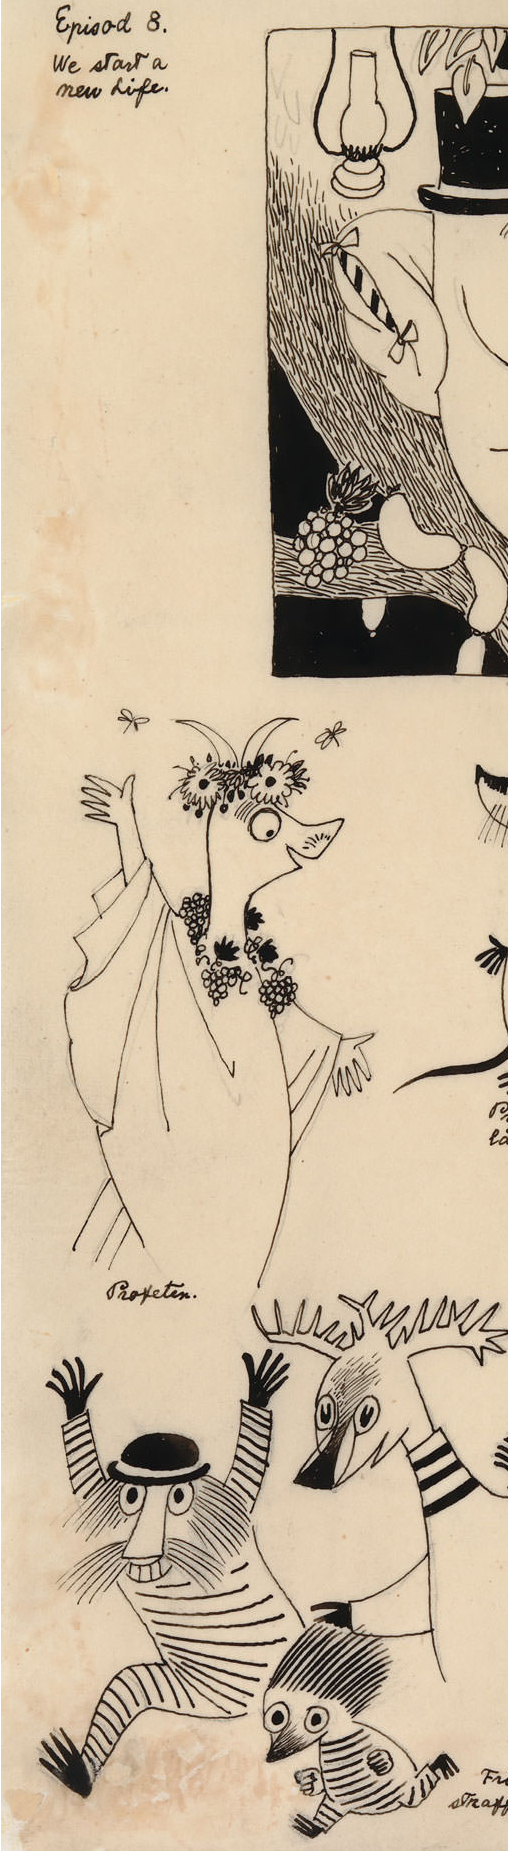 moomin character art by tove jansson.